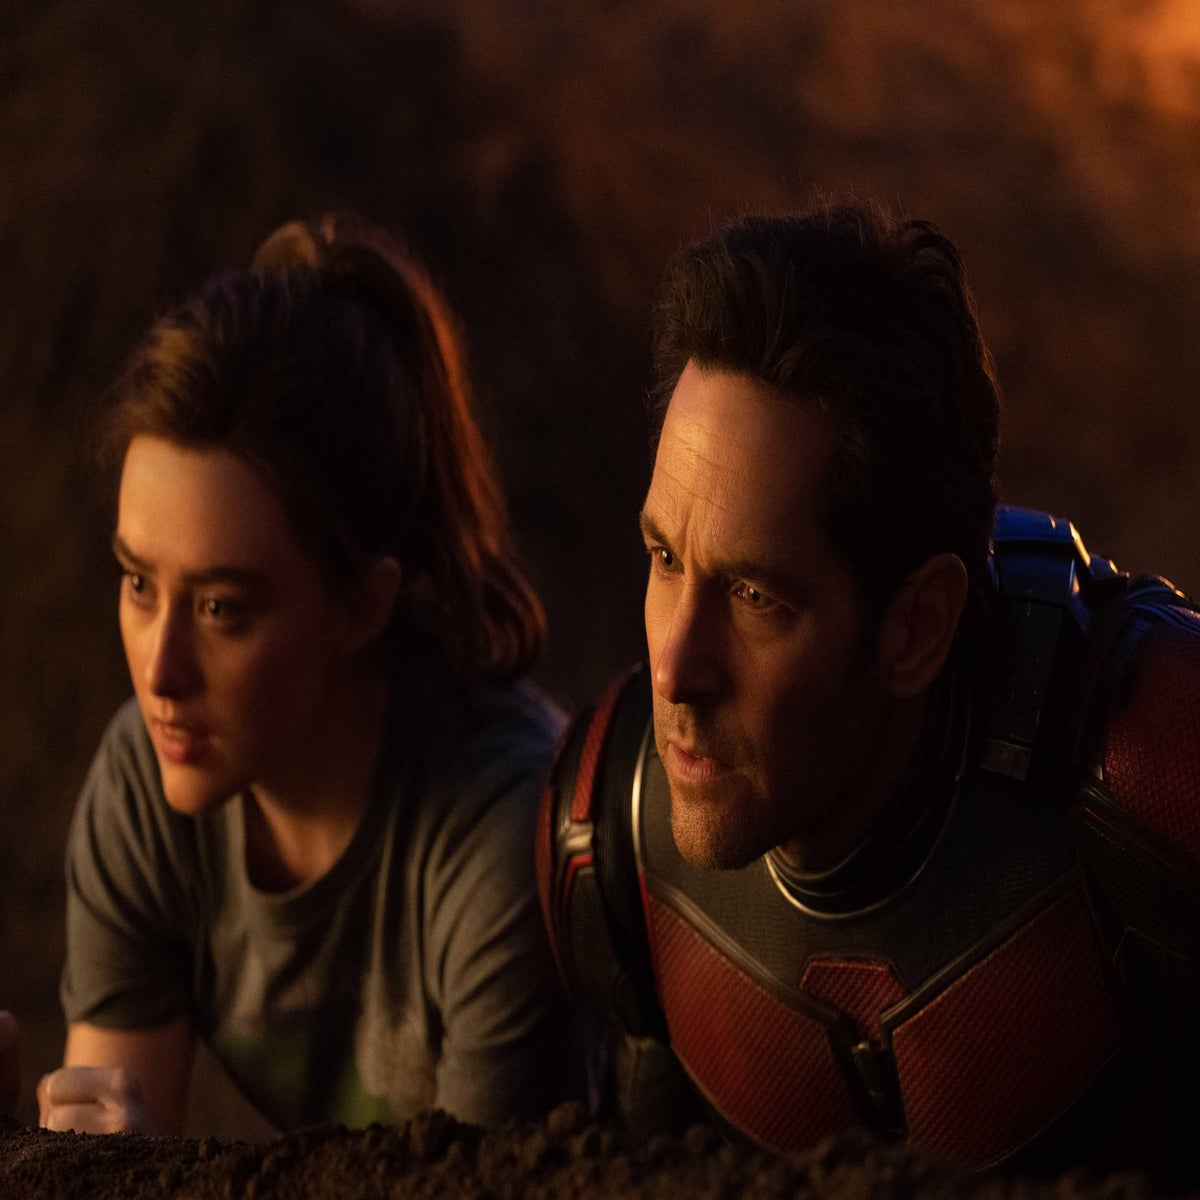 Ant-Man and The Wasp: Quantumania: Tickets on Sale - Trailers & Videos - Rotten  Tomatoes